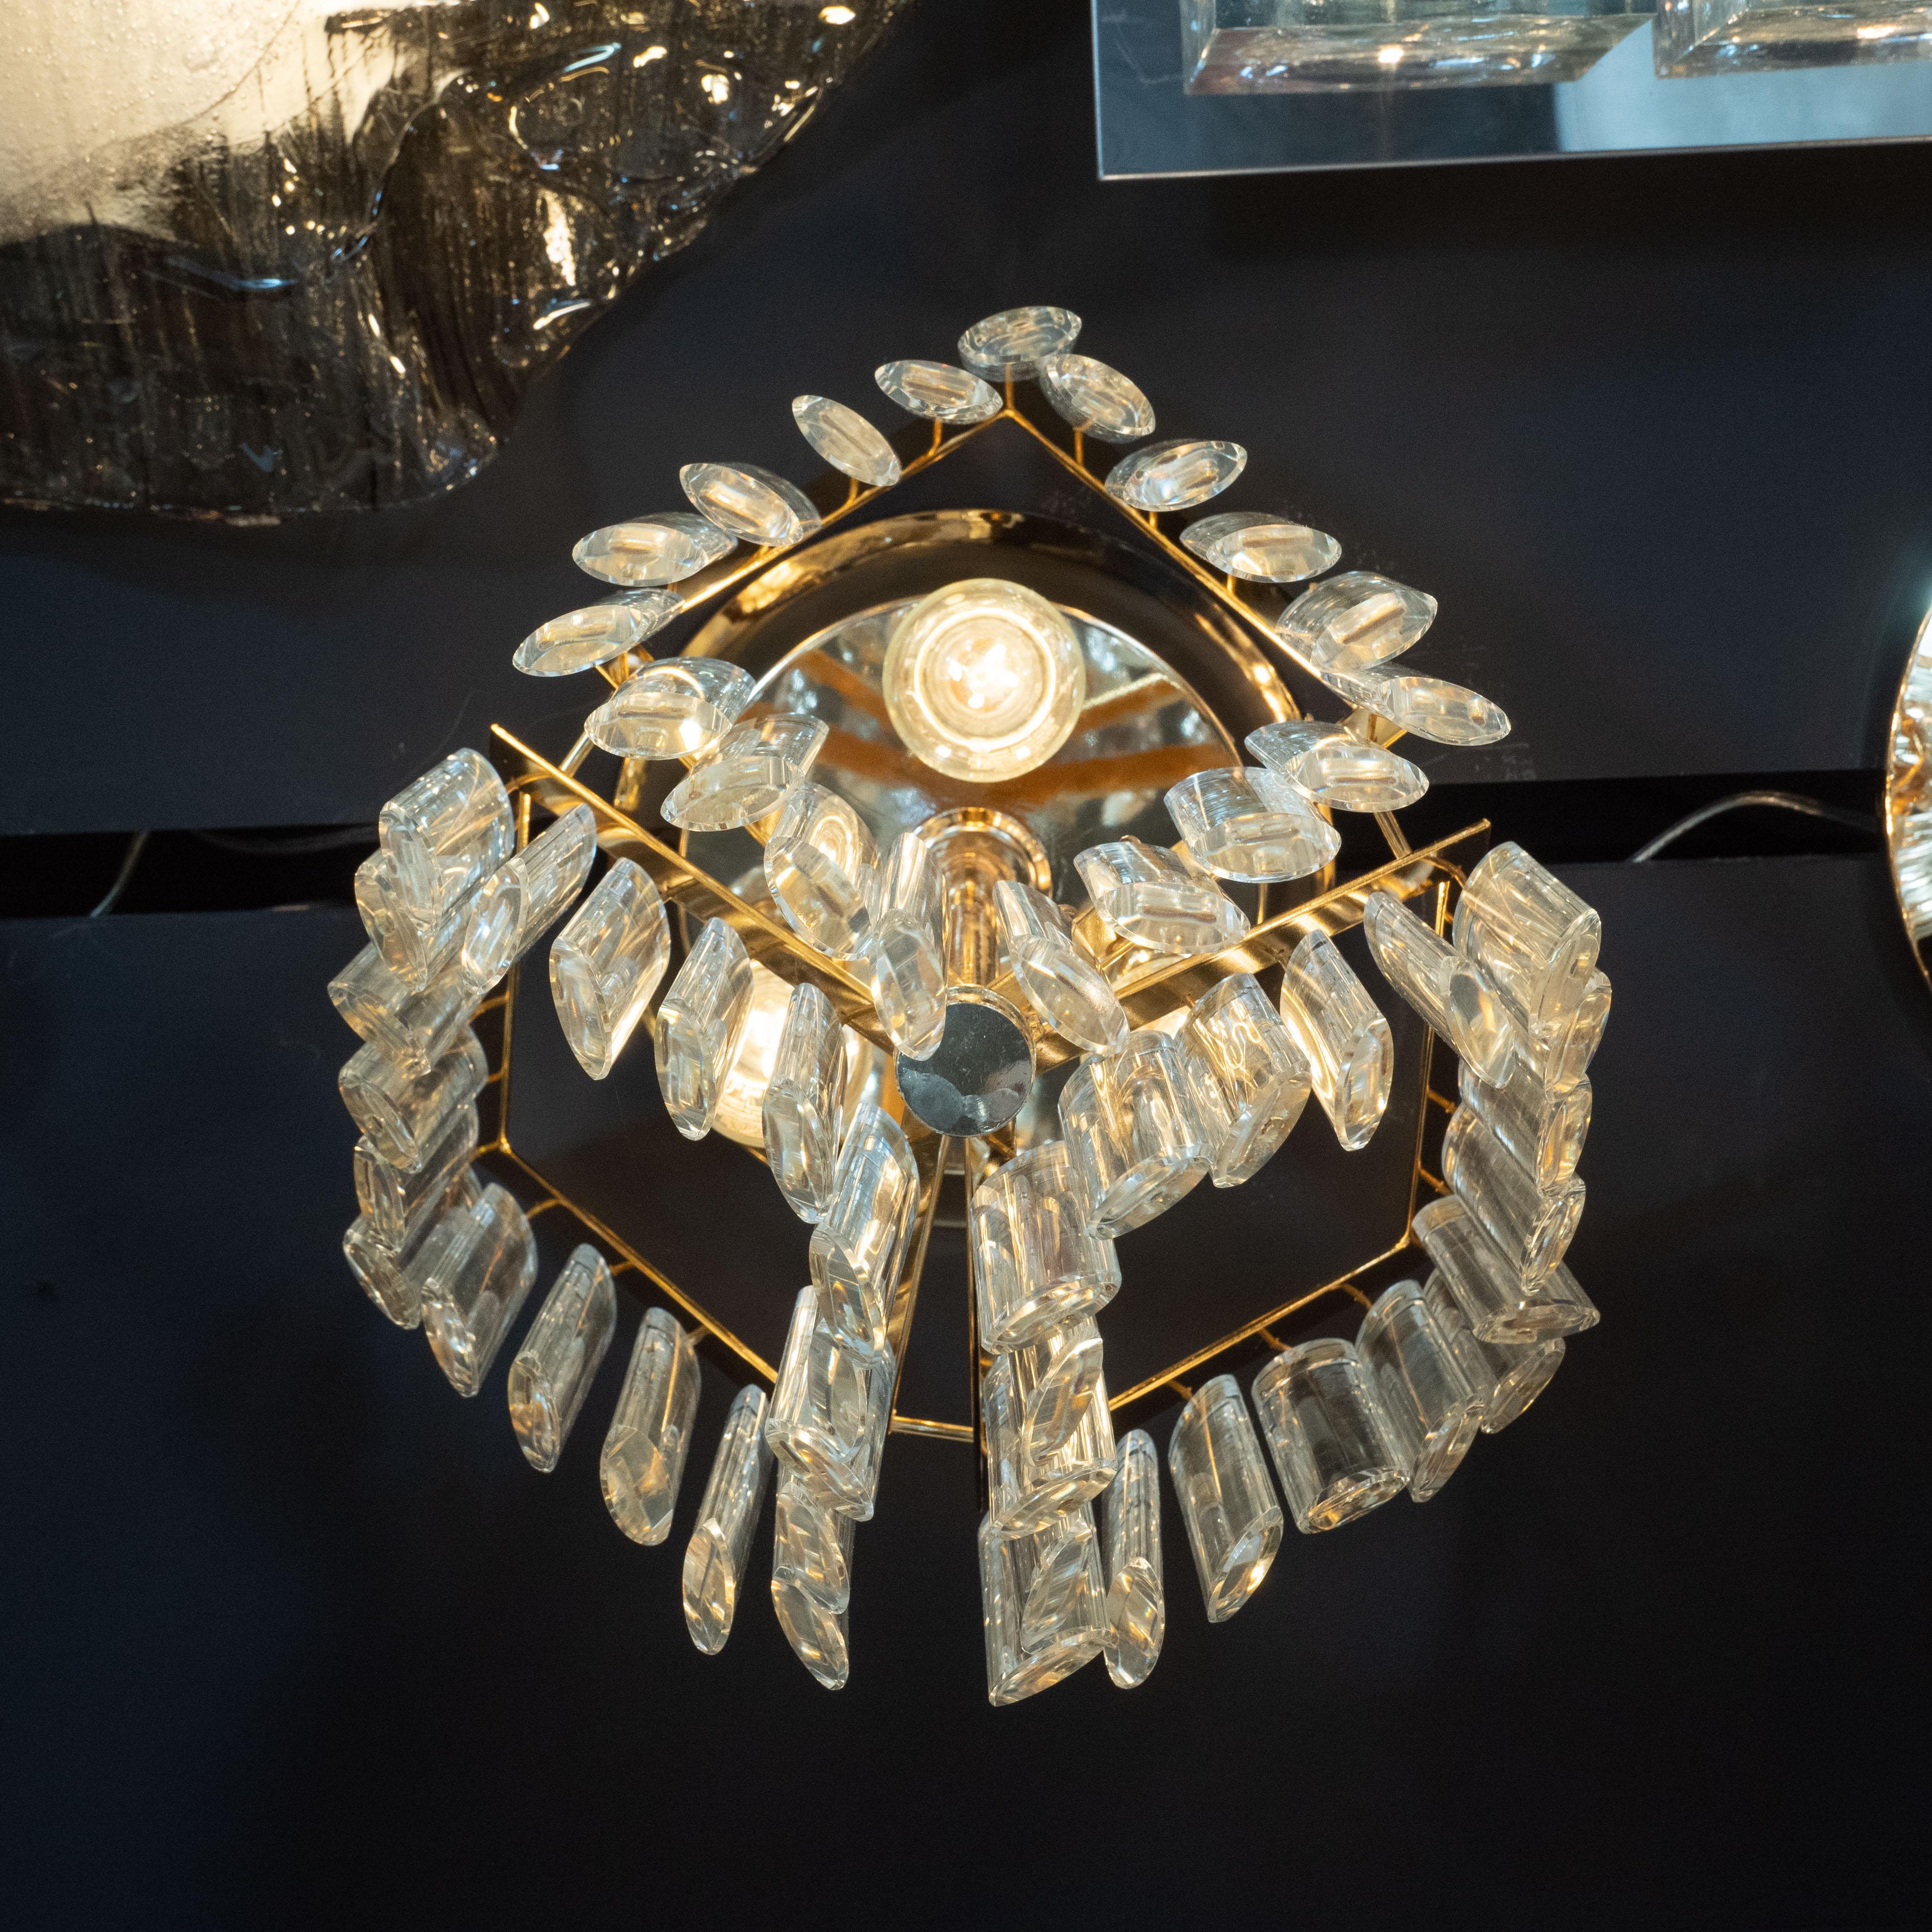 Late 20th Century Mid-Century Modern Crystal and Brass Chandelier by J. & L. Lobmeyr Company For Sale